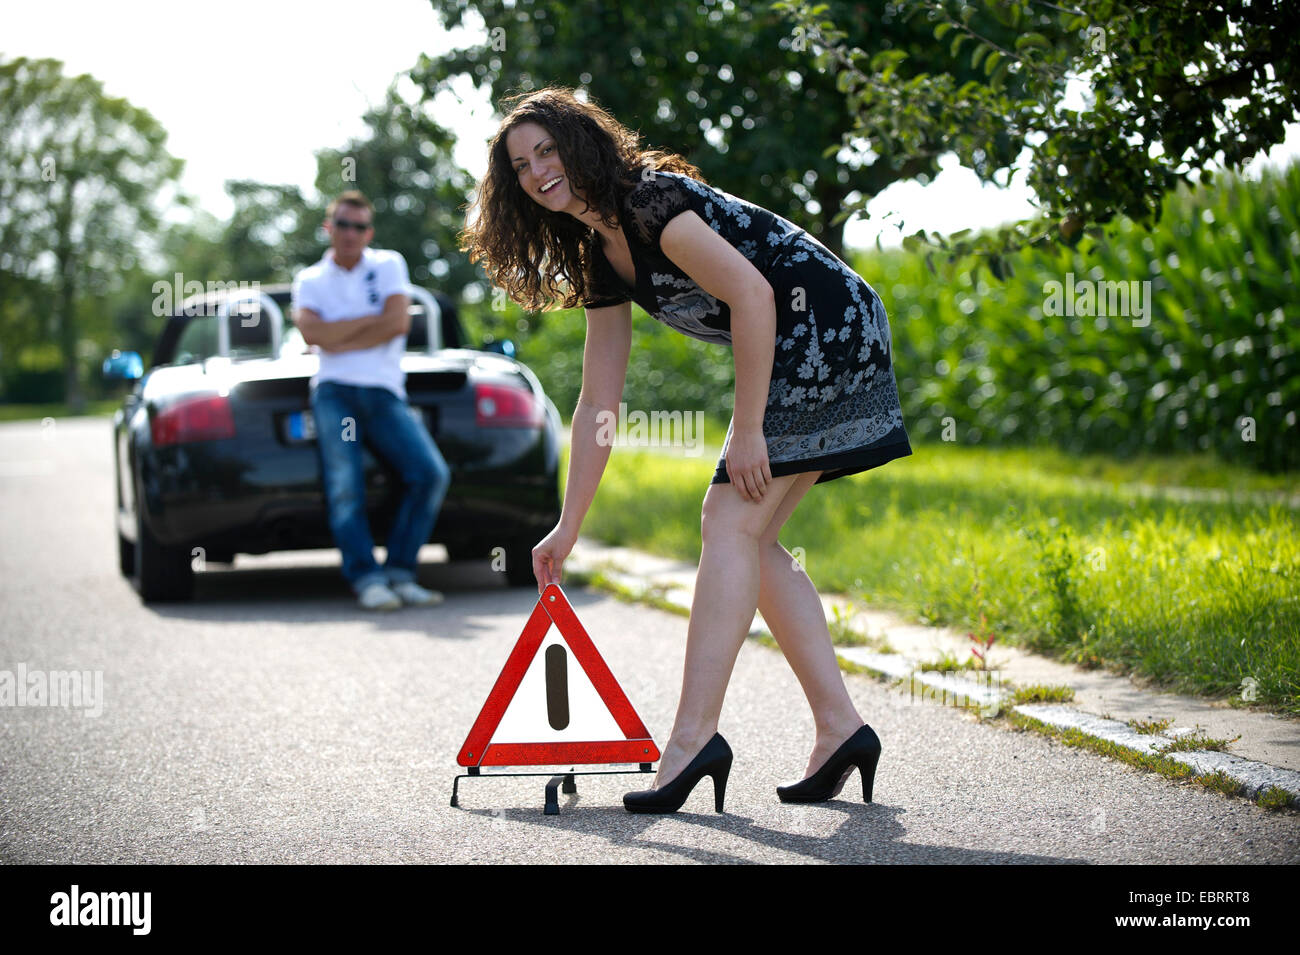 young woman putting up a warning triangle with a smile after a breakdown on a country road while taking it humorously, Germany Stock Photo